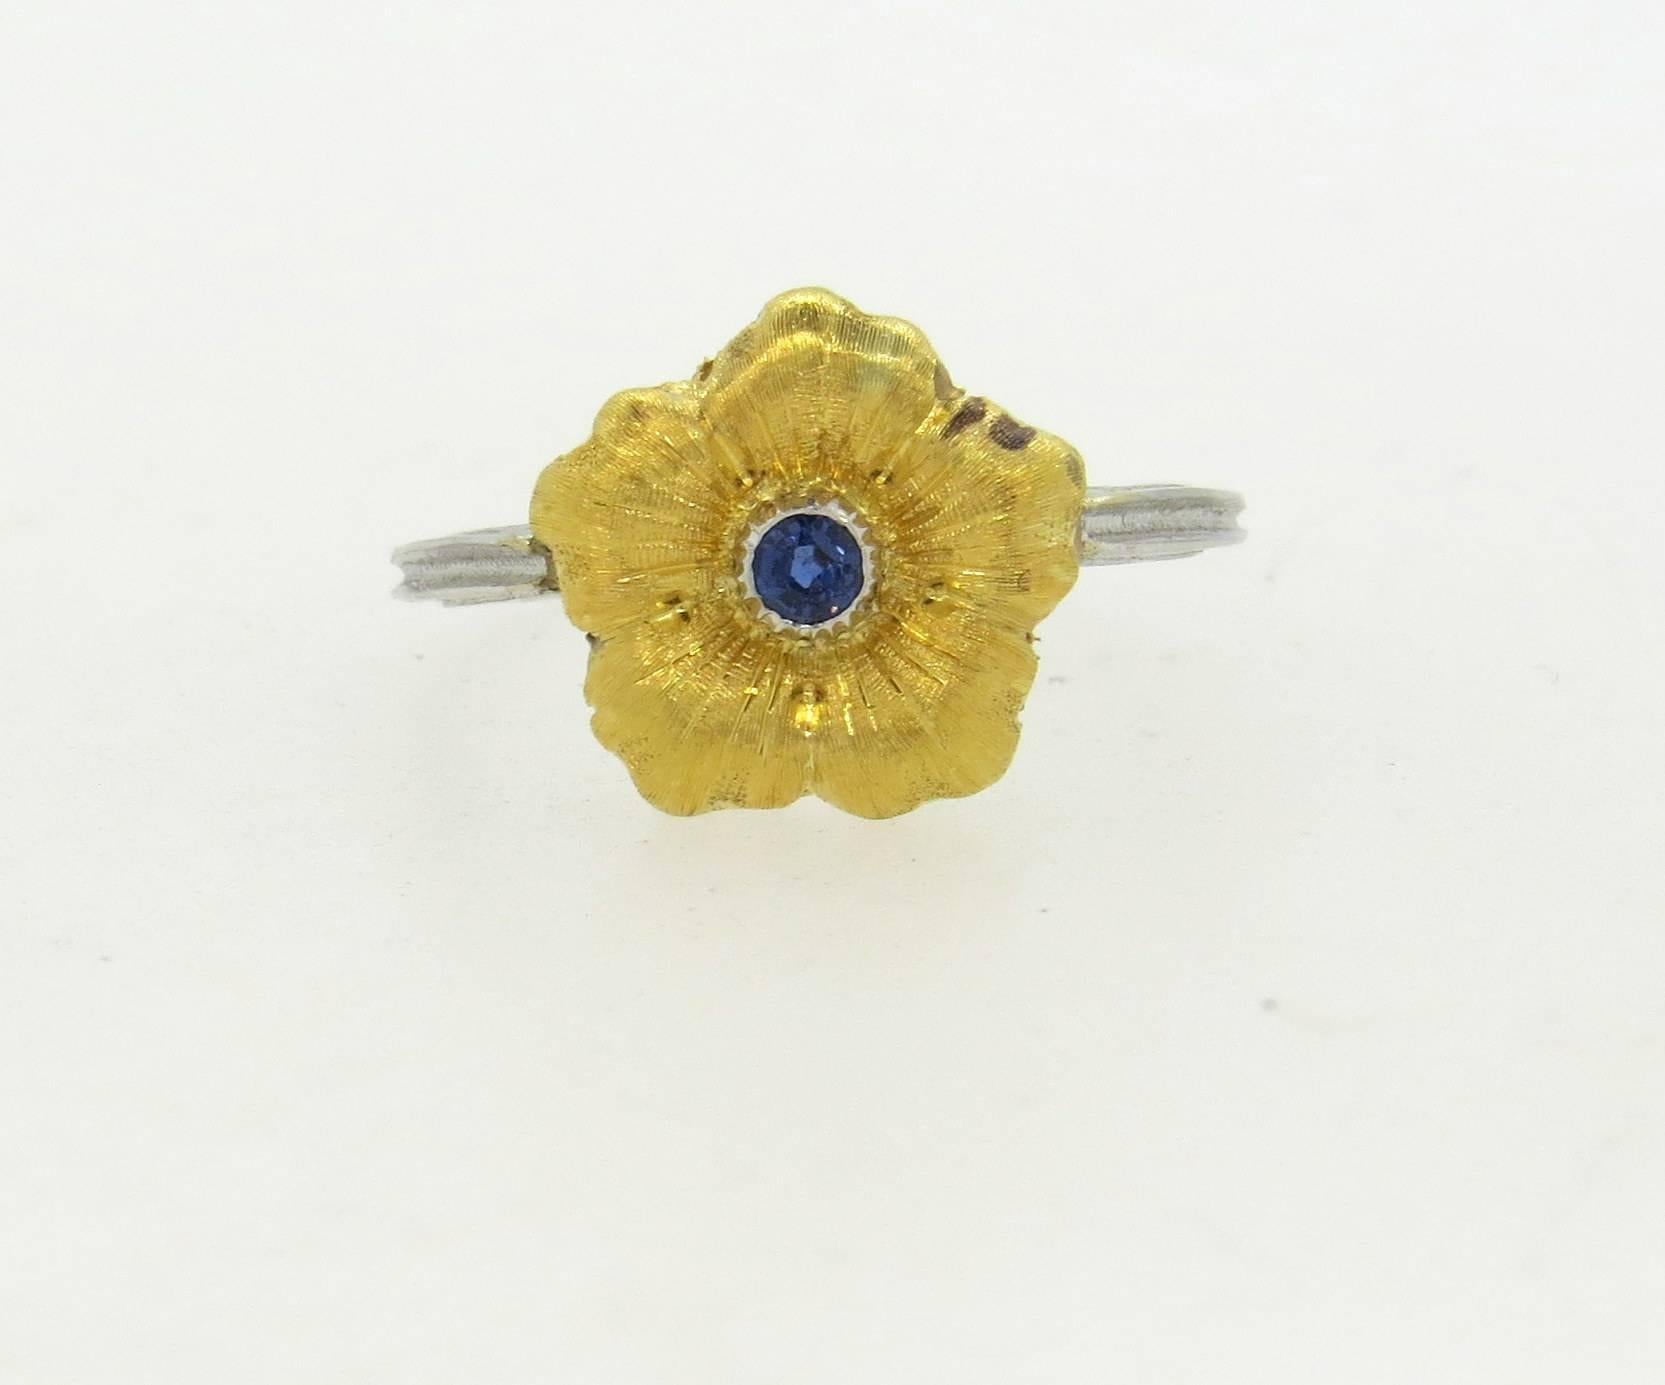 18k white and yellow gold ring, crafted by Buccellati, featuring flower top, decorated with a 0.12ct blue sapphire in the center. Ring is a size 7, ring top is 12mm x 14mm. Marked: Italy 18k, Buccellati. Weight of the piece - 3.2 grams
Comes with